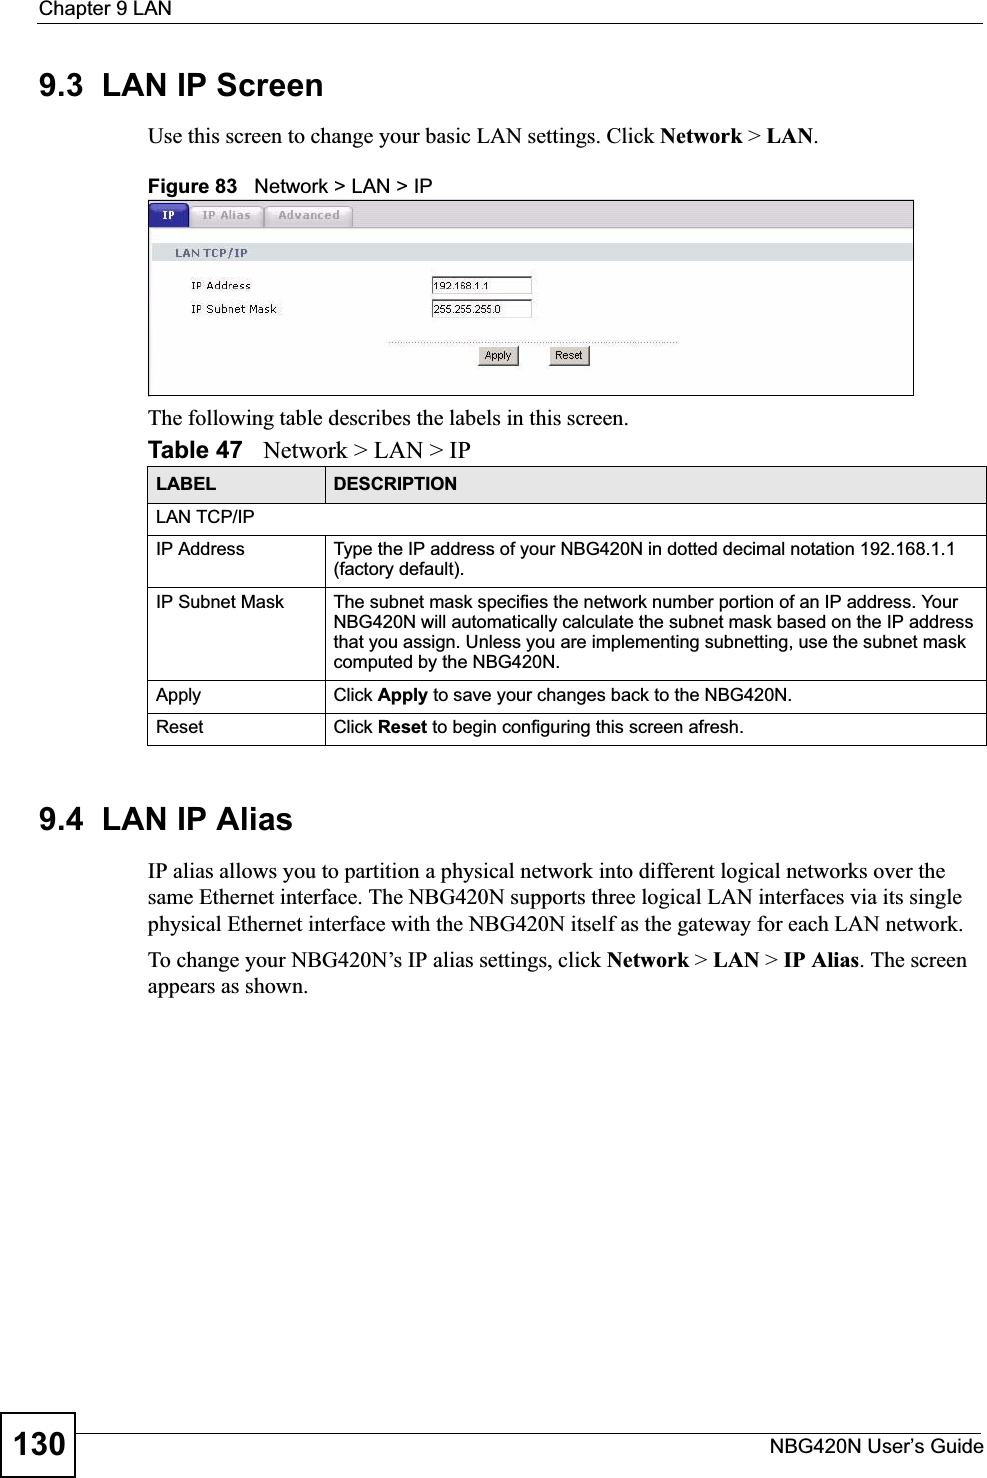 Chapter 9 LANNBG420N User’s Guide1309.3  LAN IP ScreenUse this screen to change your basic LAN settings. Click Network &gt; LAN.Figure 83   Network &gt; LAN &gt; IP The following table describes the labels in this screen.9.4  LAN IP Alias IP alias allows you to partition a physical network into different logical networks over the same Ethernet interface. The NBG420N supports three logical LAN interfaces via its single physical Ethernet interface with the NBG420N itself as the gateway for each LAN network.To change your NBG420N’s IP alias settings, click Network &gt; LAN &gt; IP Alias. The screen appears as shown.Table 47   Network &gt; LAN &gt; IPLABEL DESCRIPTIONLAN TCP/IPIP Address Type the IP address of your NBG420N in dotted decimal notation 192.168.1.1 (factory default).IP Subnet Mask The subnet mask specifies the network number portion of an IP address. Your NBG420N will automatically calculate the subnet mask based on the IP address that you assign. Unless you are implementing subnetting, use the subnet mask computed by the NBG420N.Apply Click Apply to save your changes back to the NBG420N.Reset Click Reset to begin configuring this screen afresh.